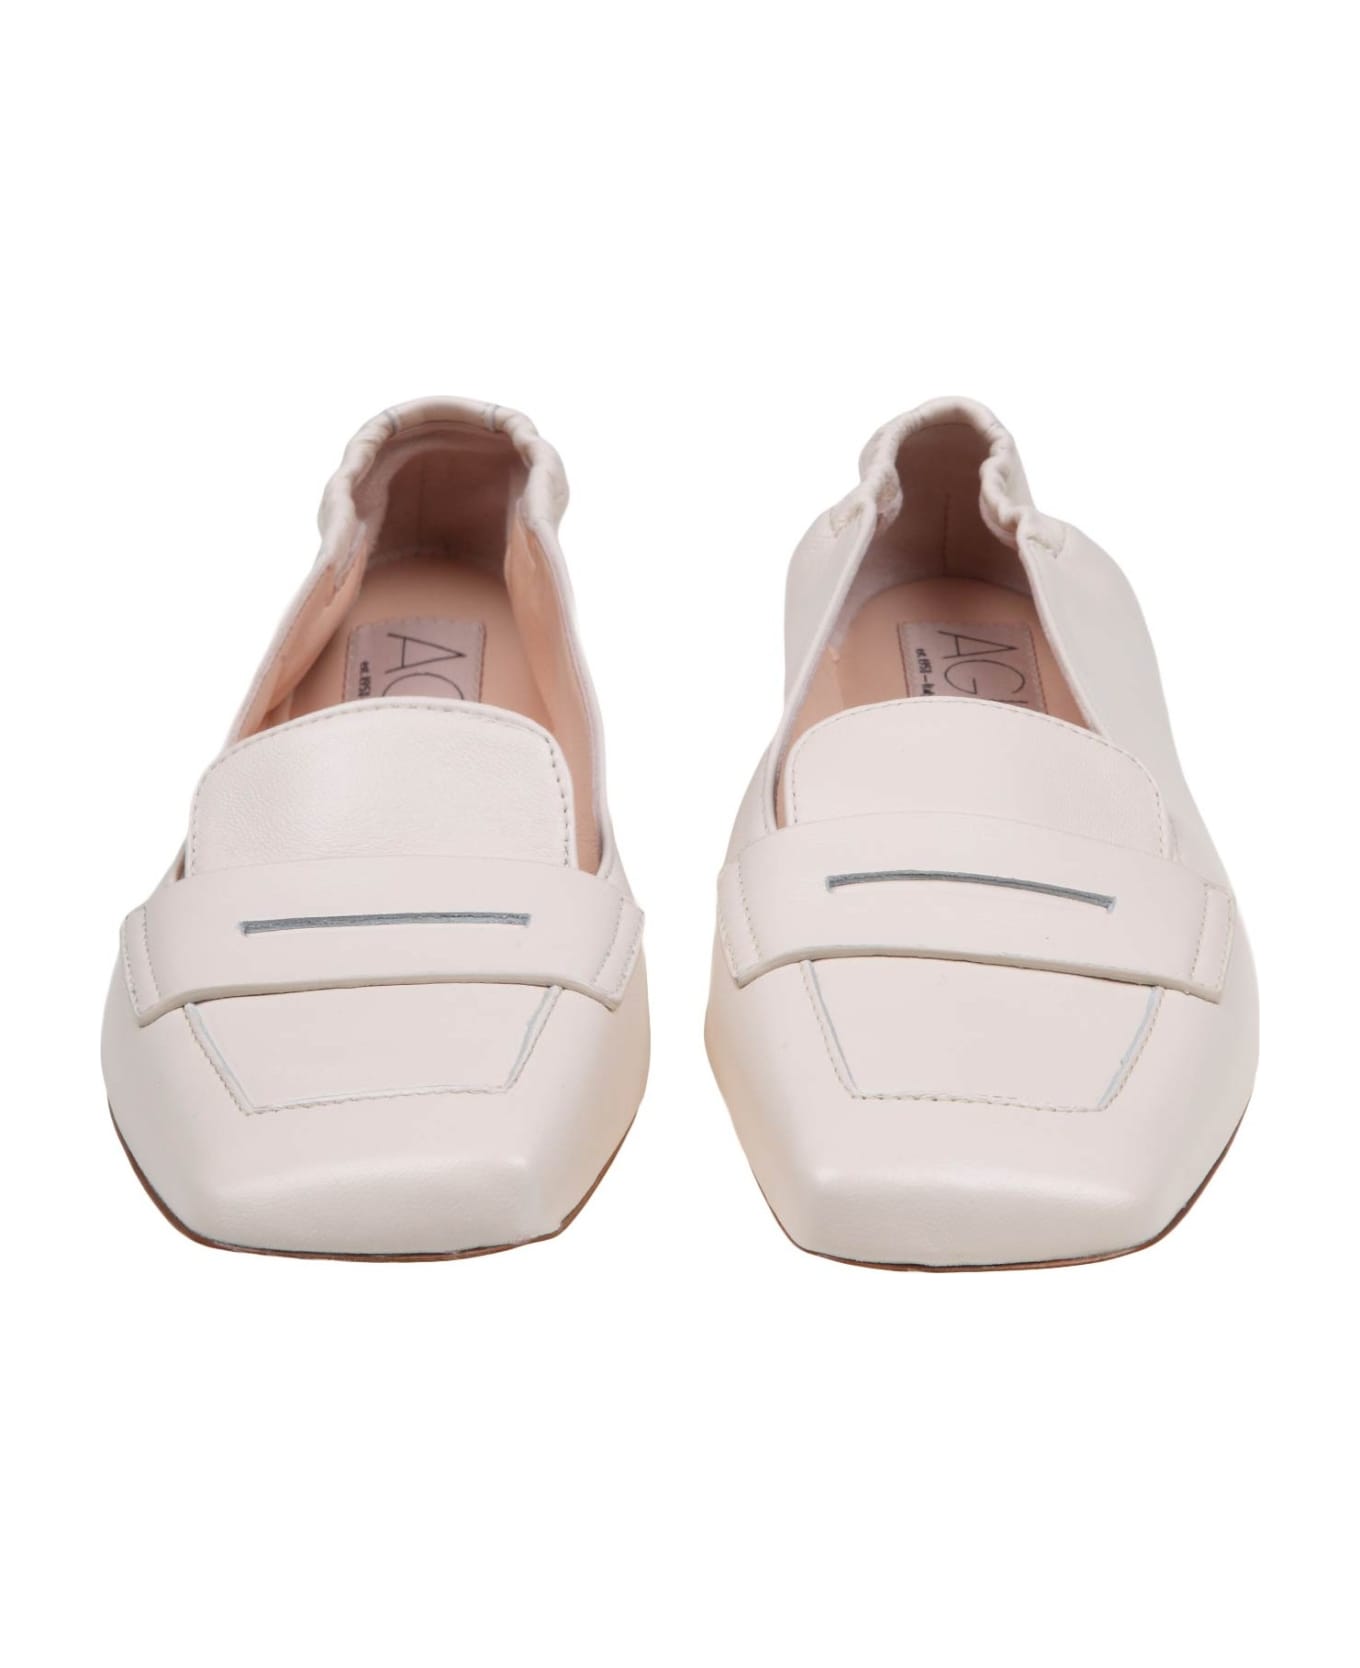 AGL Rina Loafers In Chalk Color Leather - PLASTER フラットシューズ